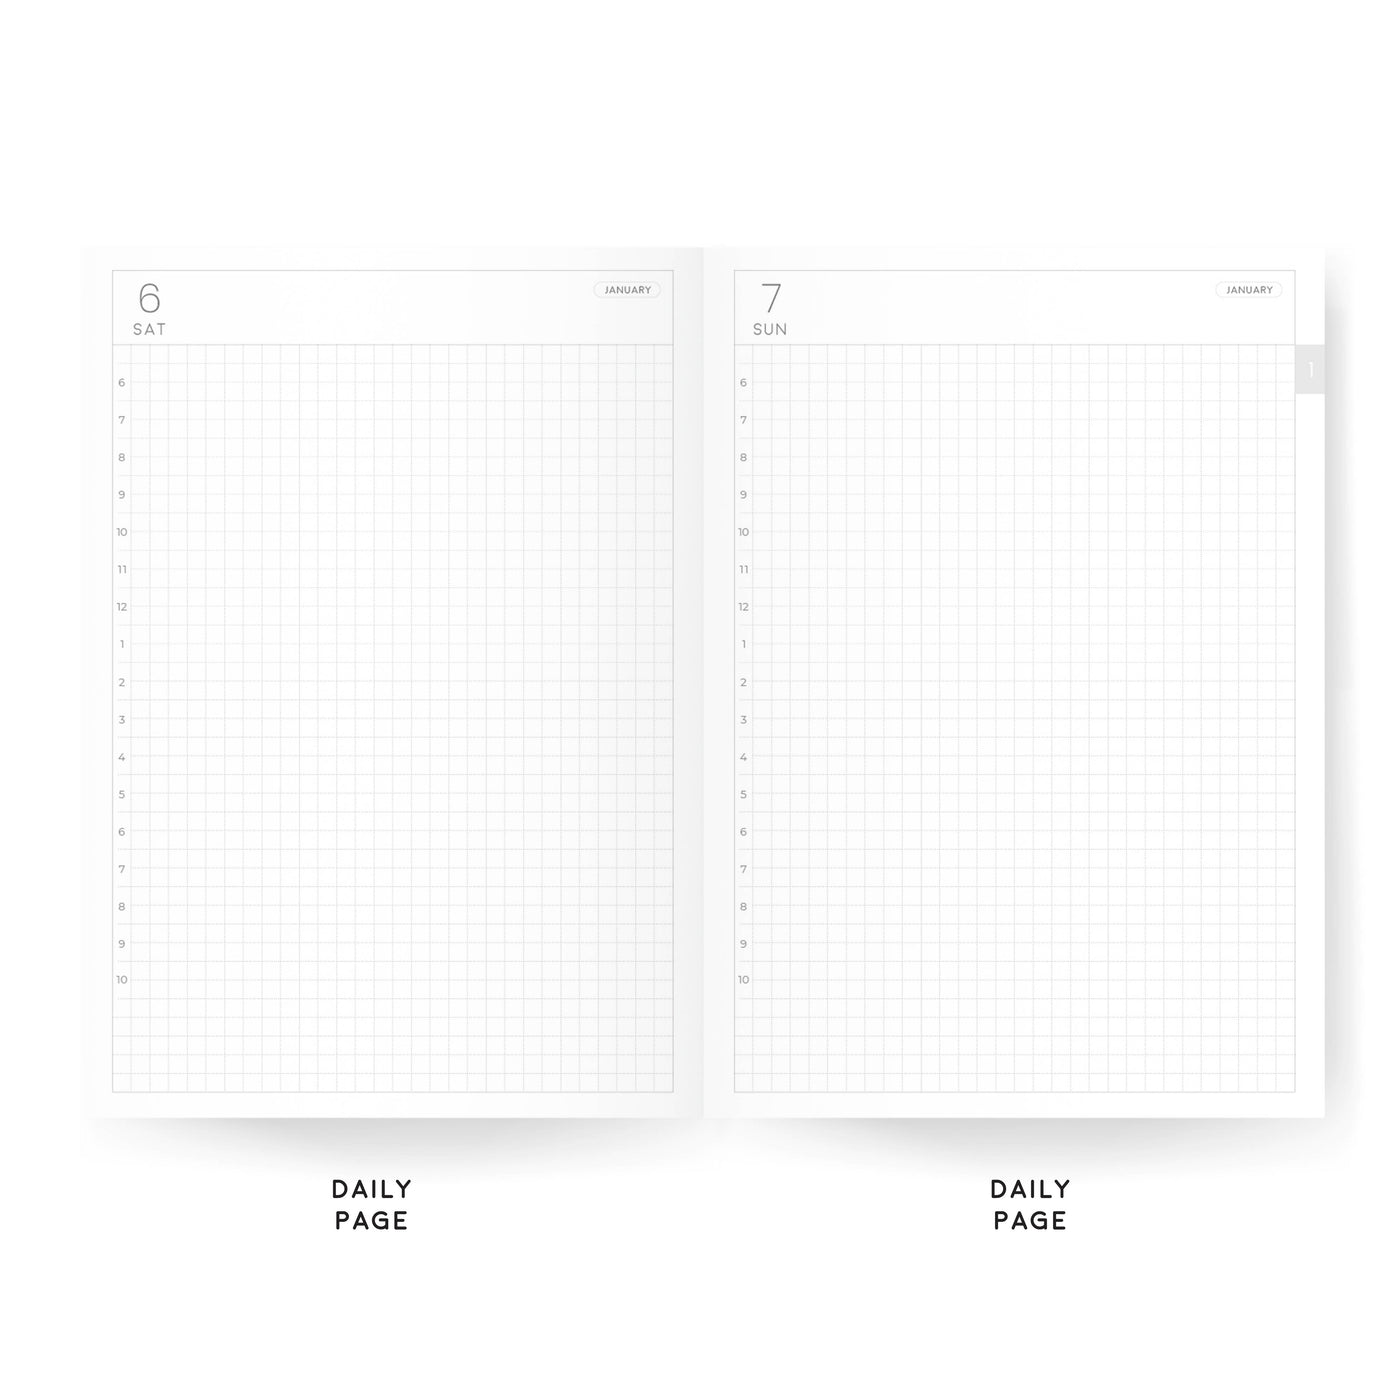 B6 Classic Daily Planners | 2024 Dated | Tomoe River Paper